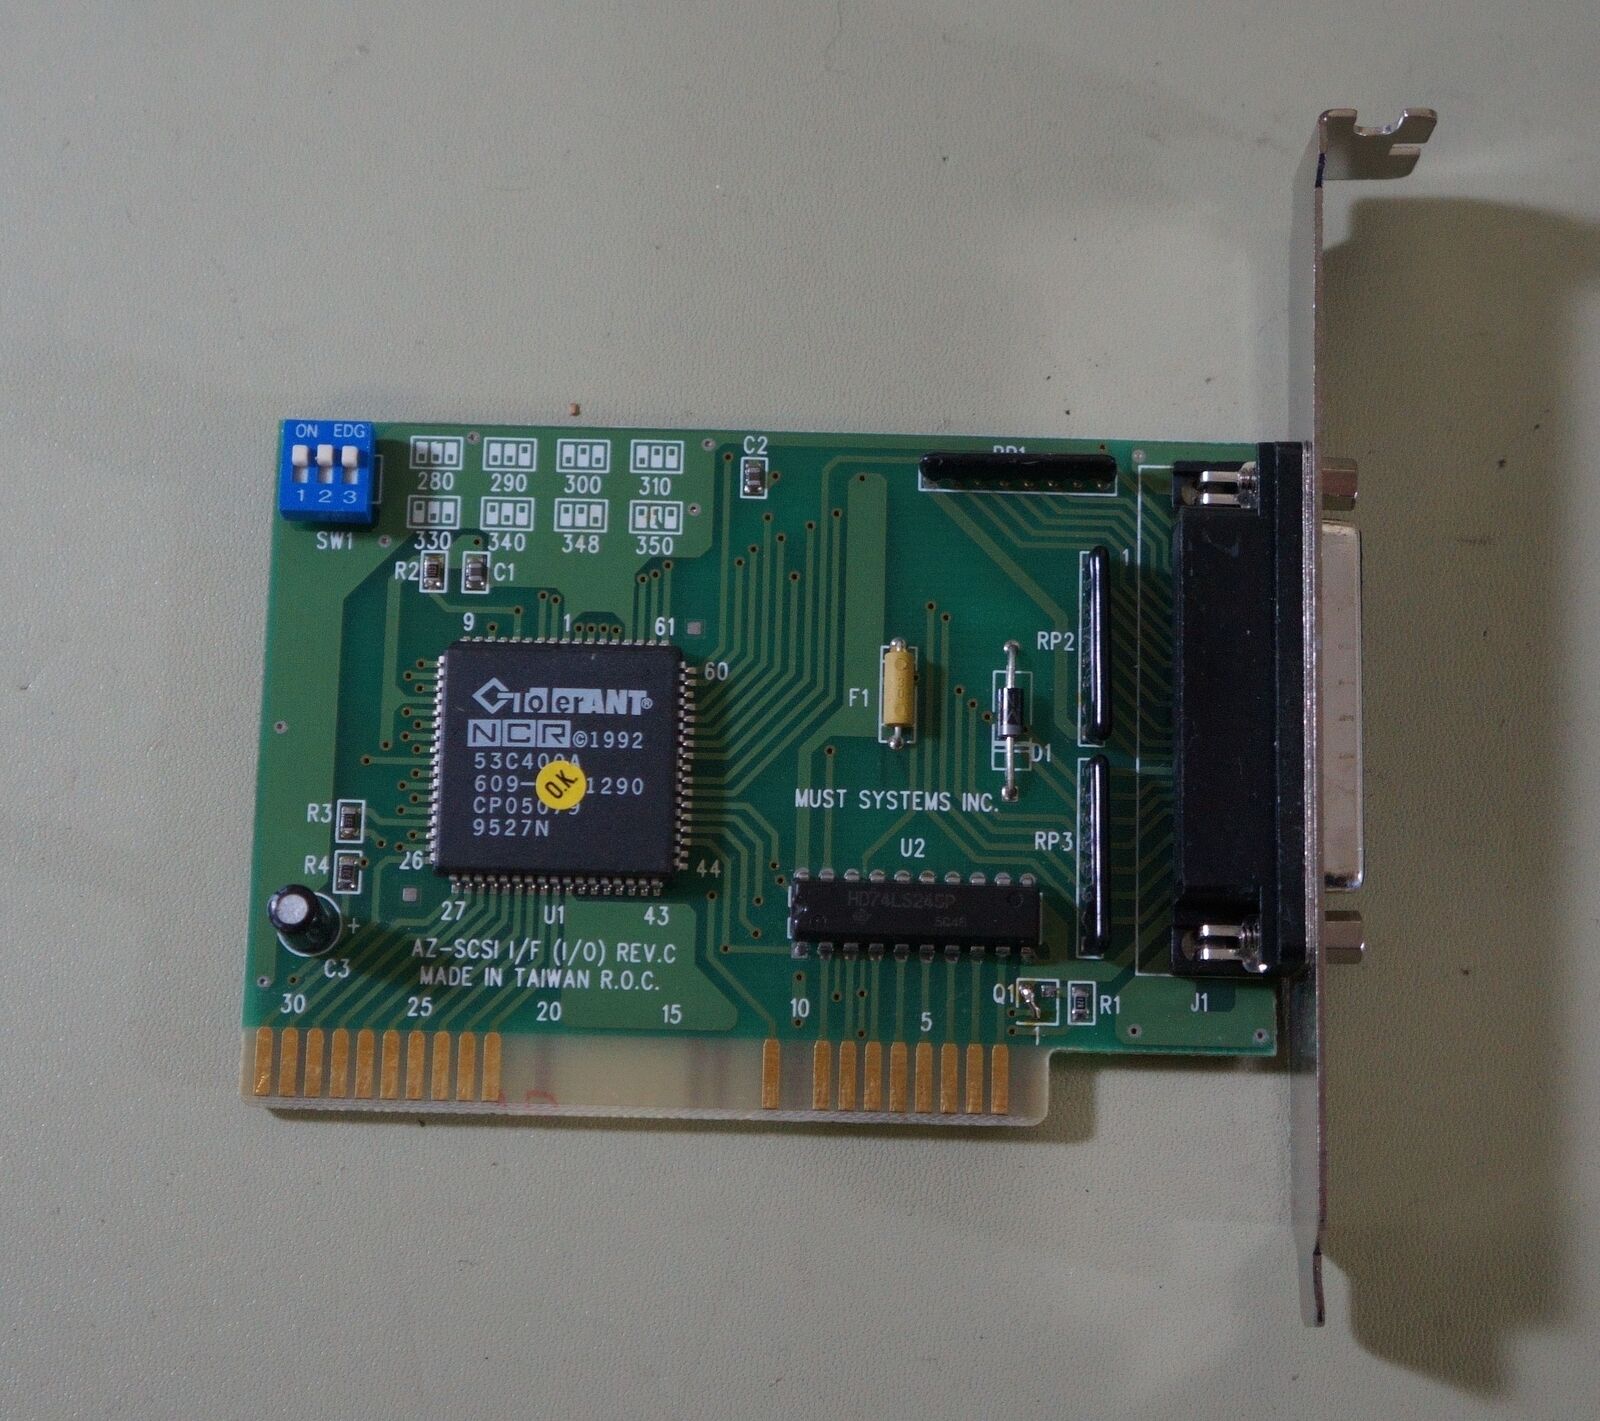 Must Systems AZ-SCSI I/F (I/O) PCI Controller Card, 25 Pin Data/Serial Port Out 